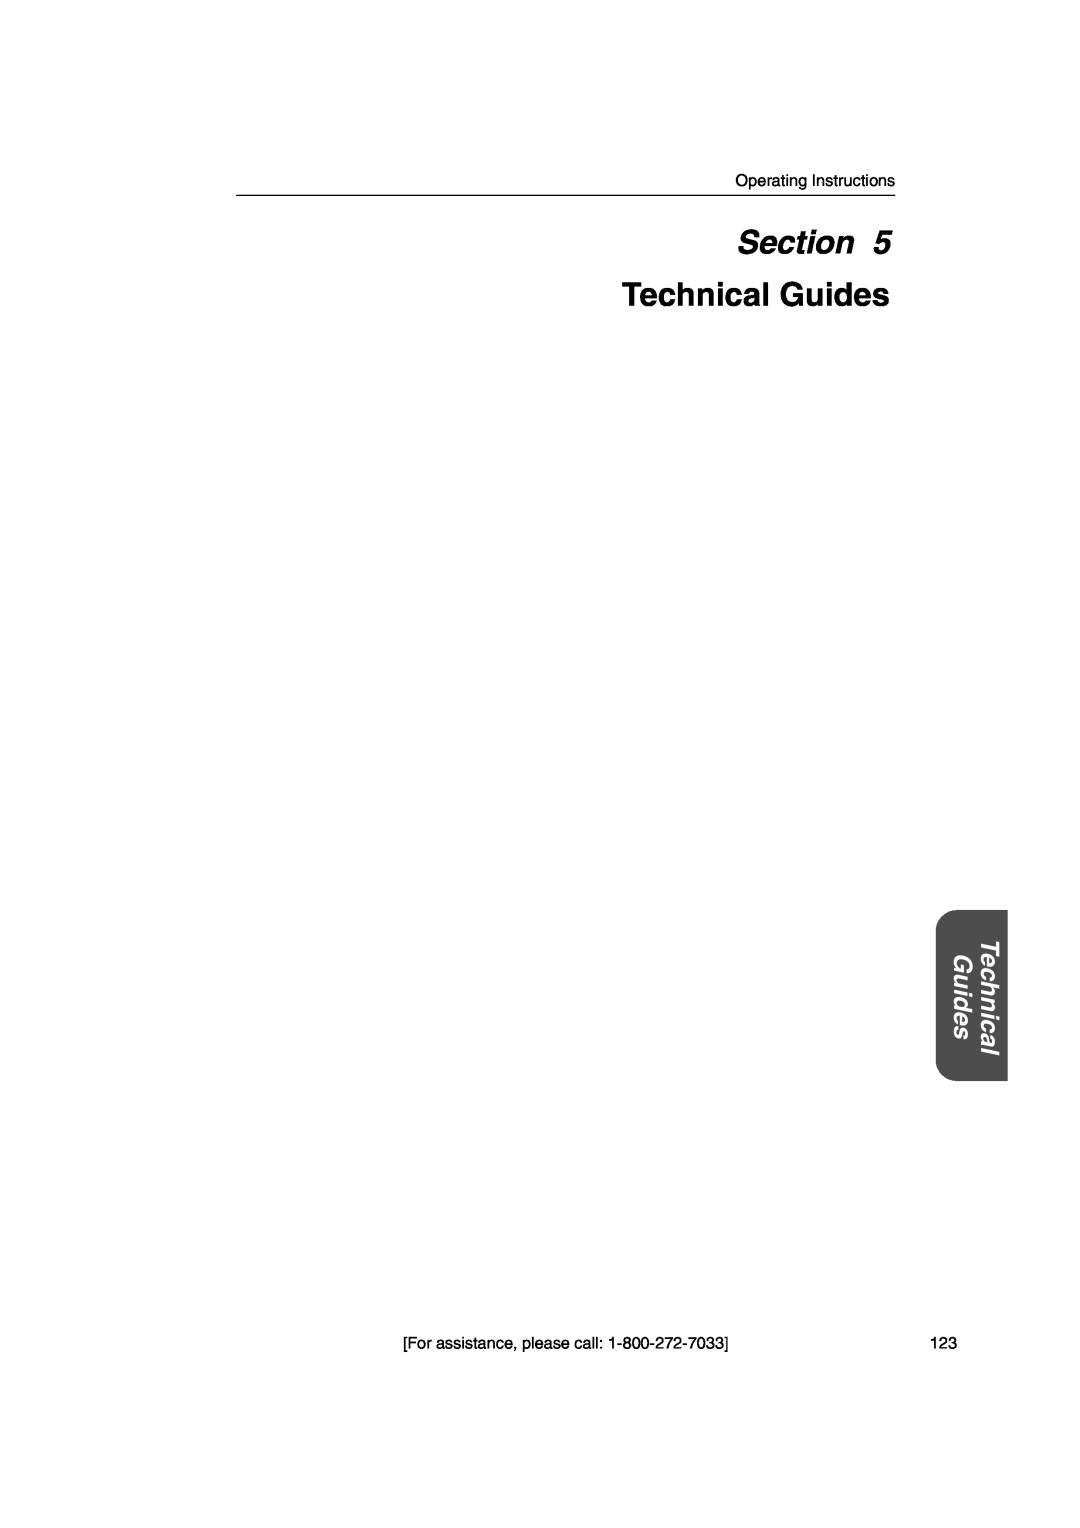 Panasonic KX-HGW600 manual Technical Guides, Section 